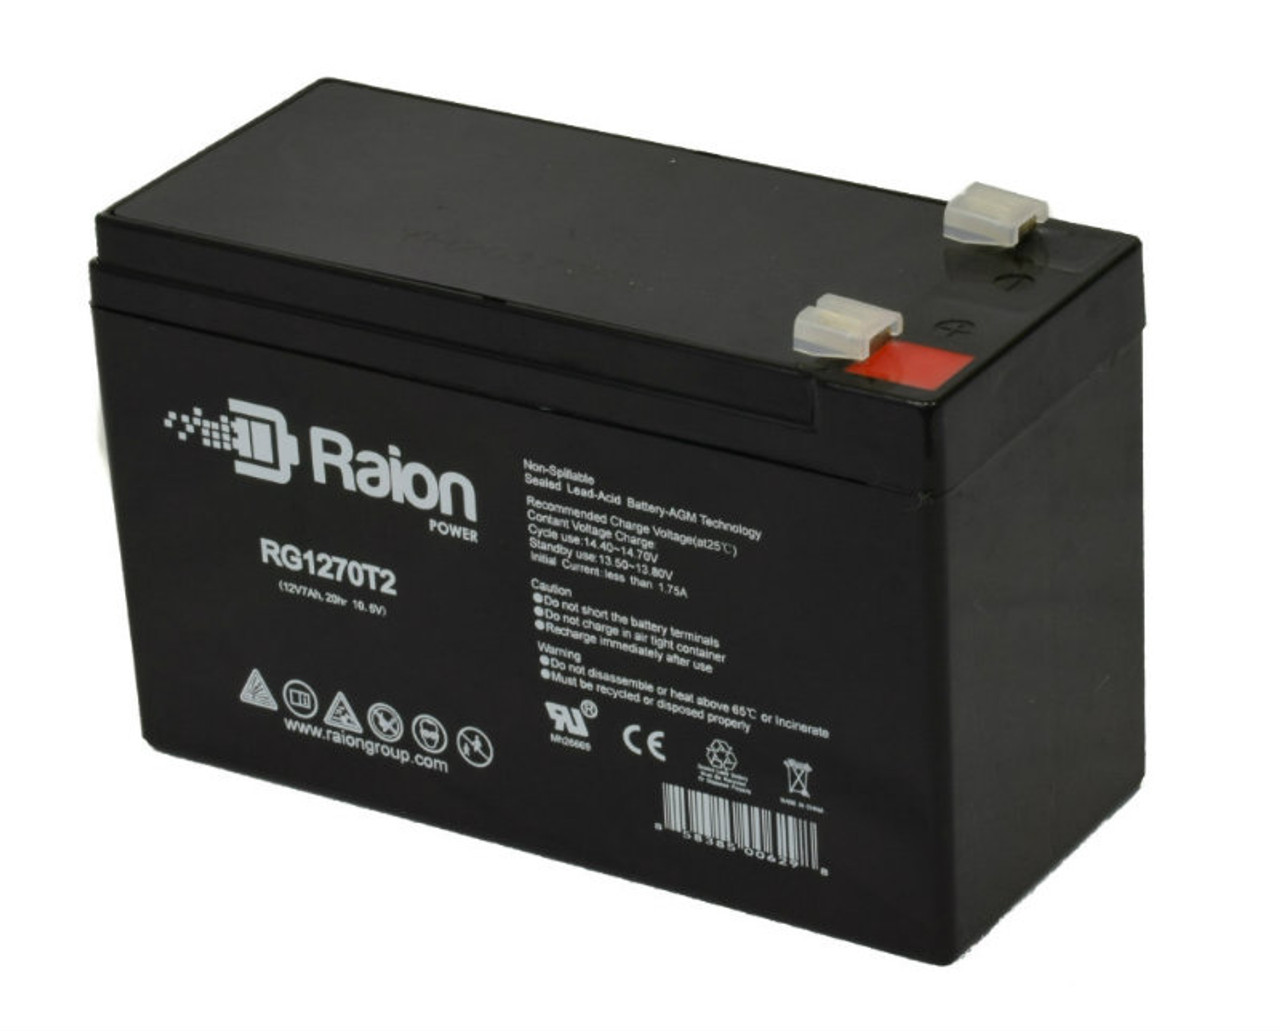 Raion Power RG1270T1 12V 7Ah Non-Spillable Replacement Battery for Leoch Battery DJW12-7L